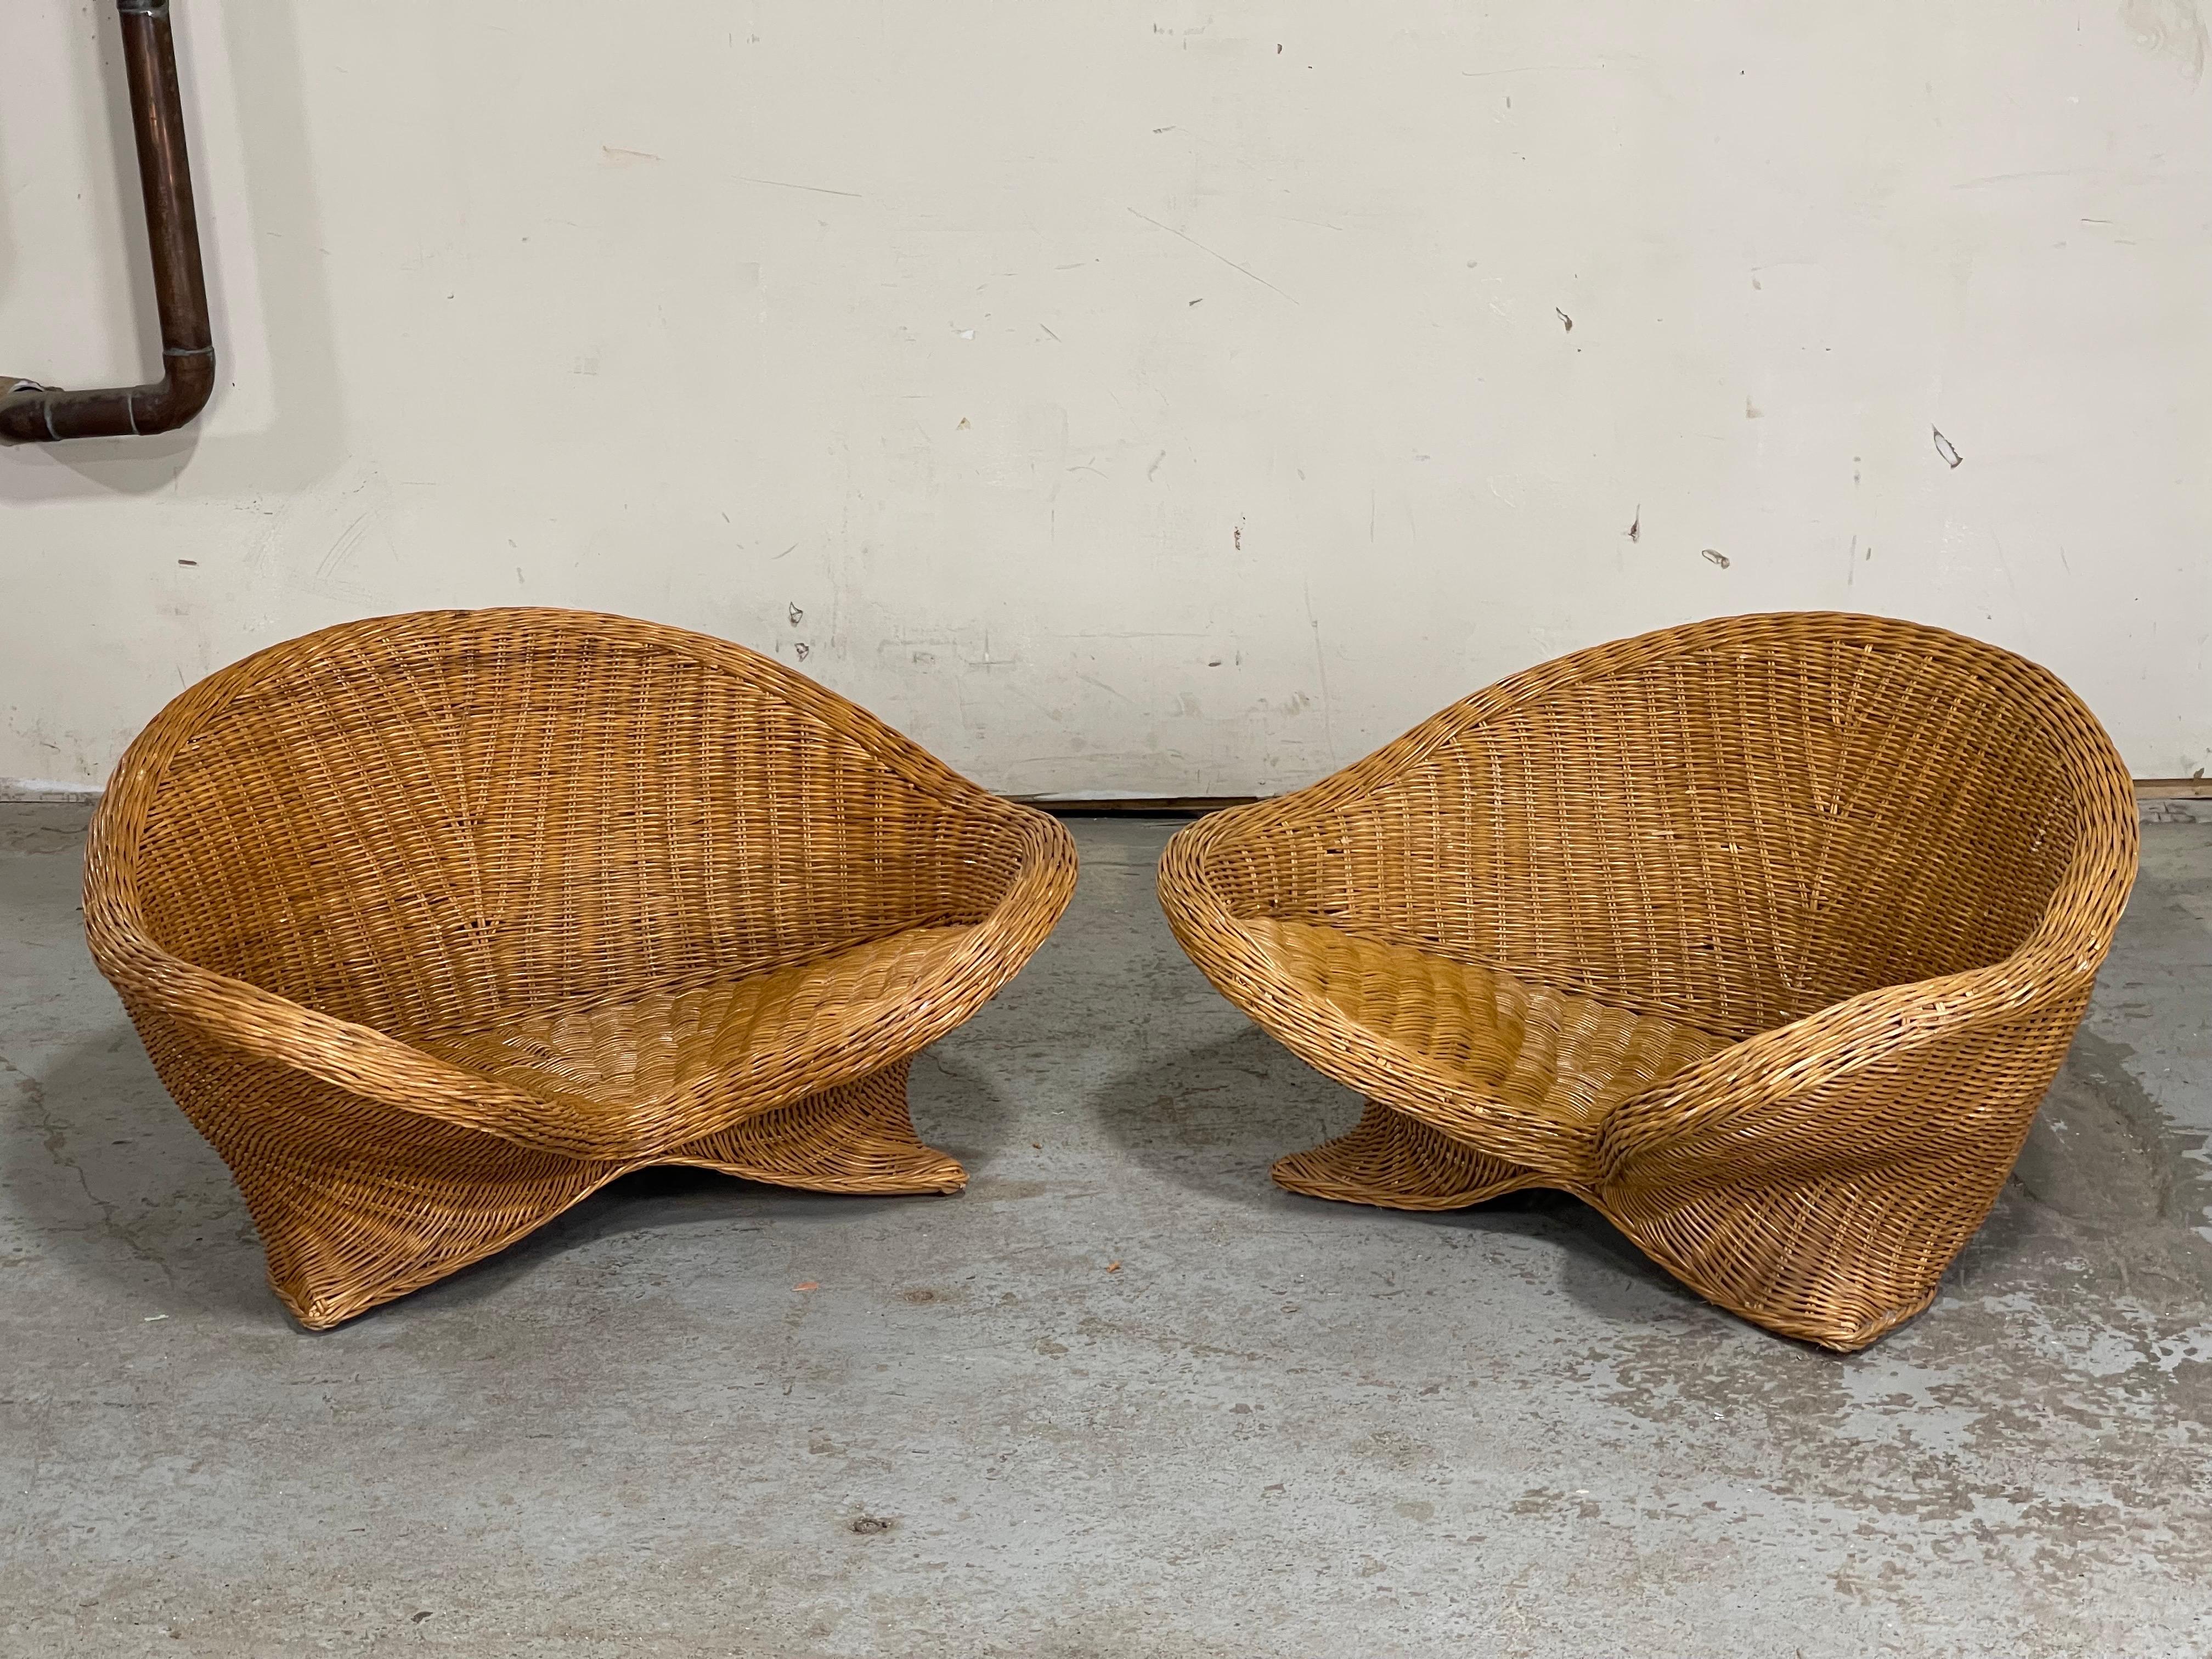 Scarce petite lotus style rattan chairs by Vivai Del Sud, Italy, 1970’s. 
The Vivai del Sud Architecture and High Decoration Group was founded in Rome in 1950. They were a leader in the production of high end furnishings and accessories for